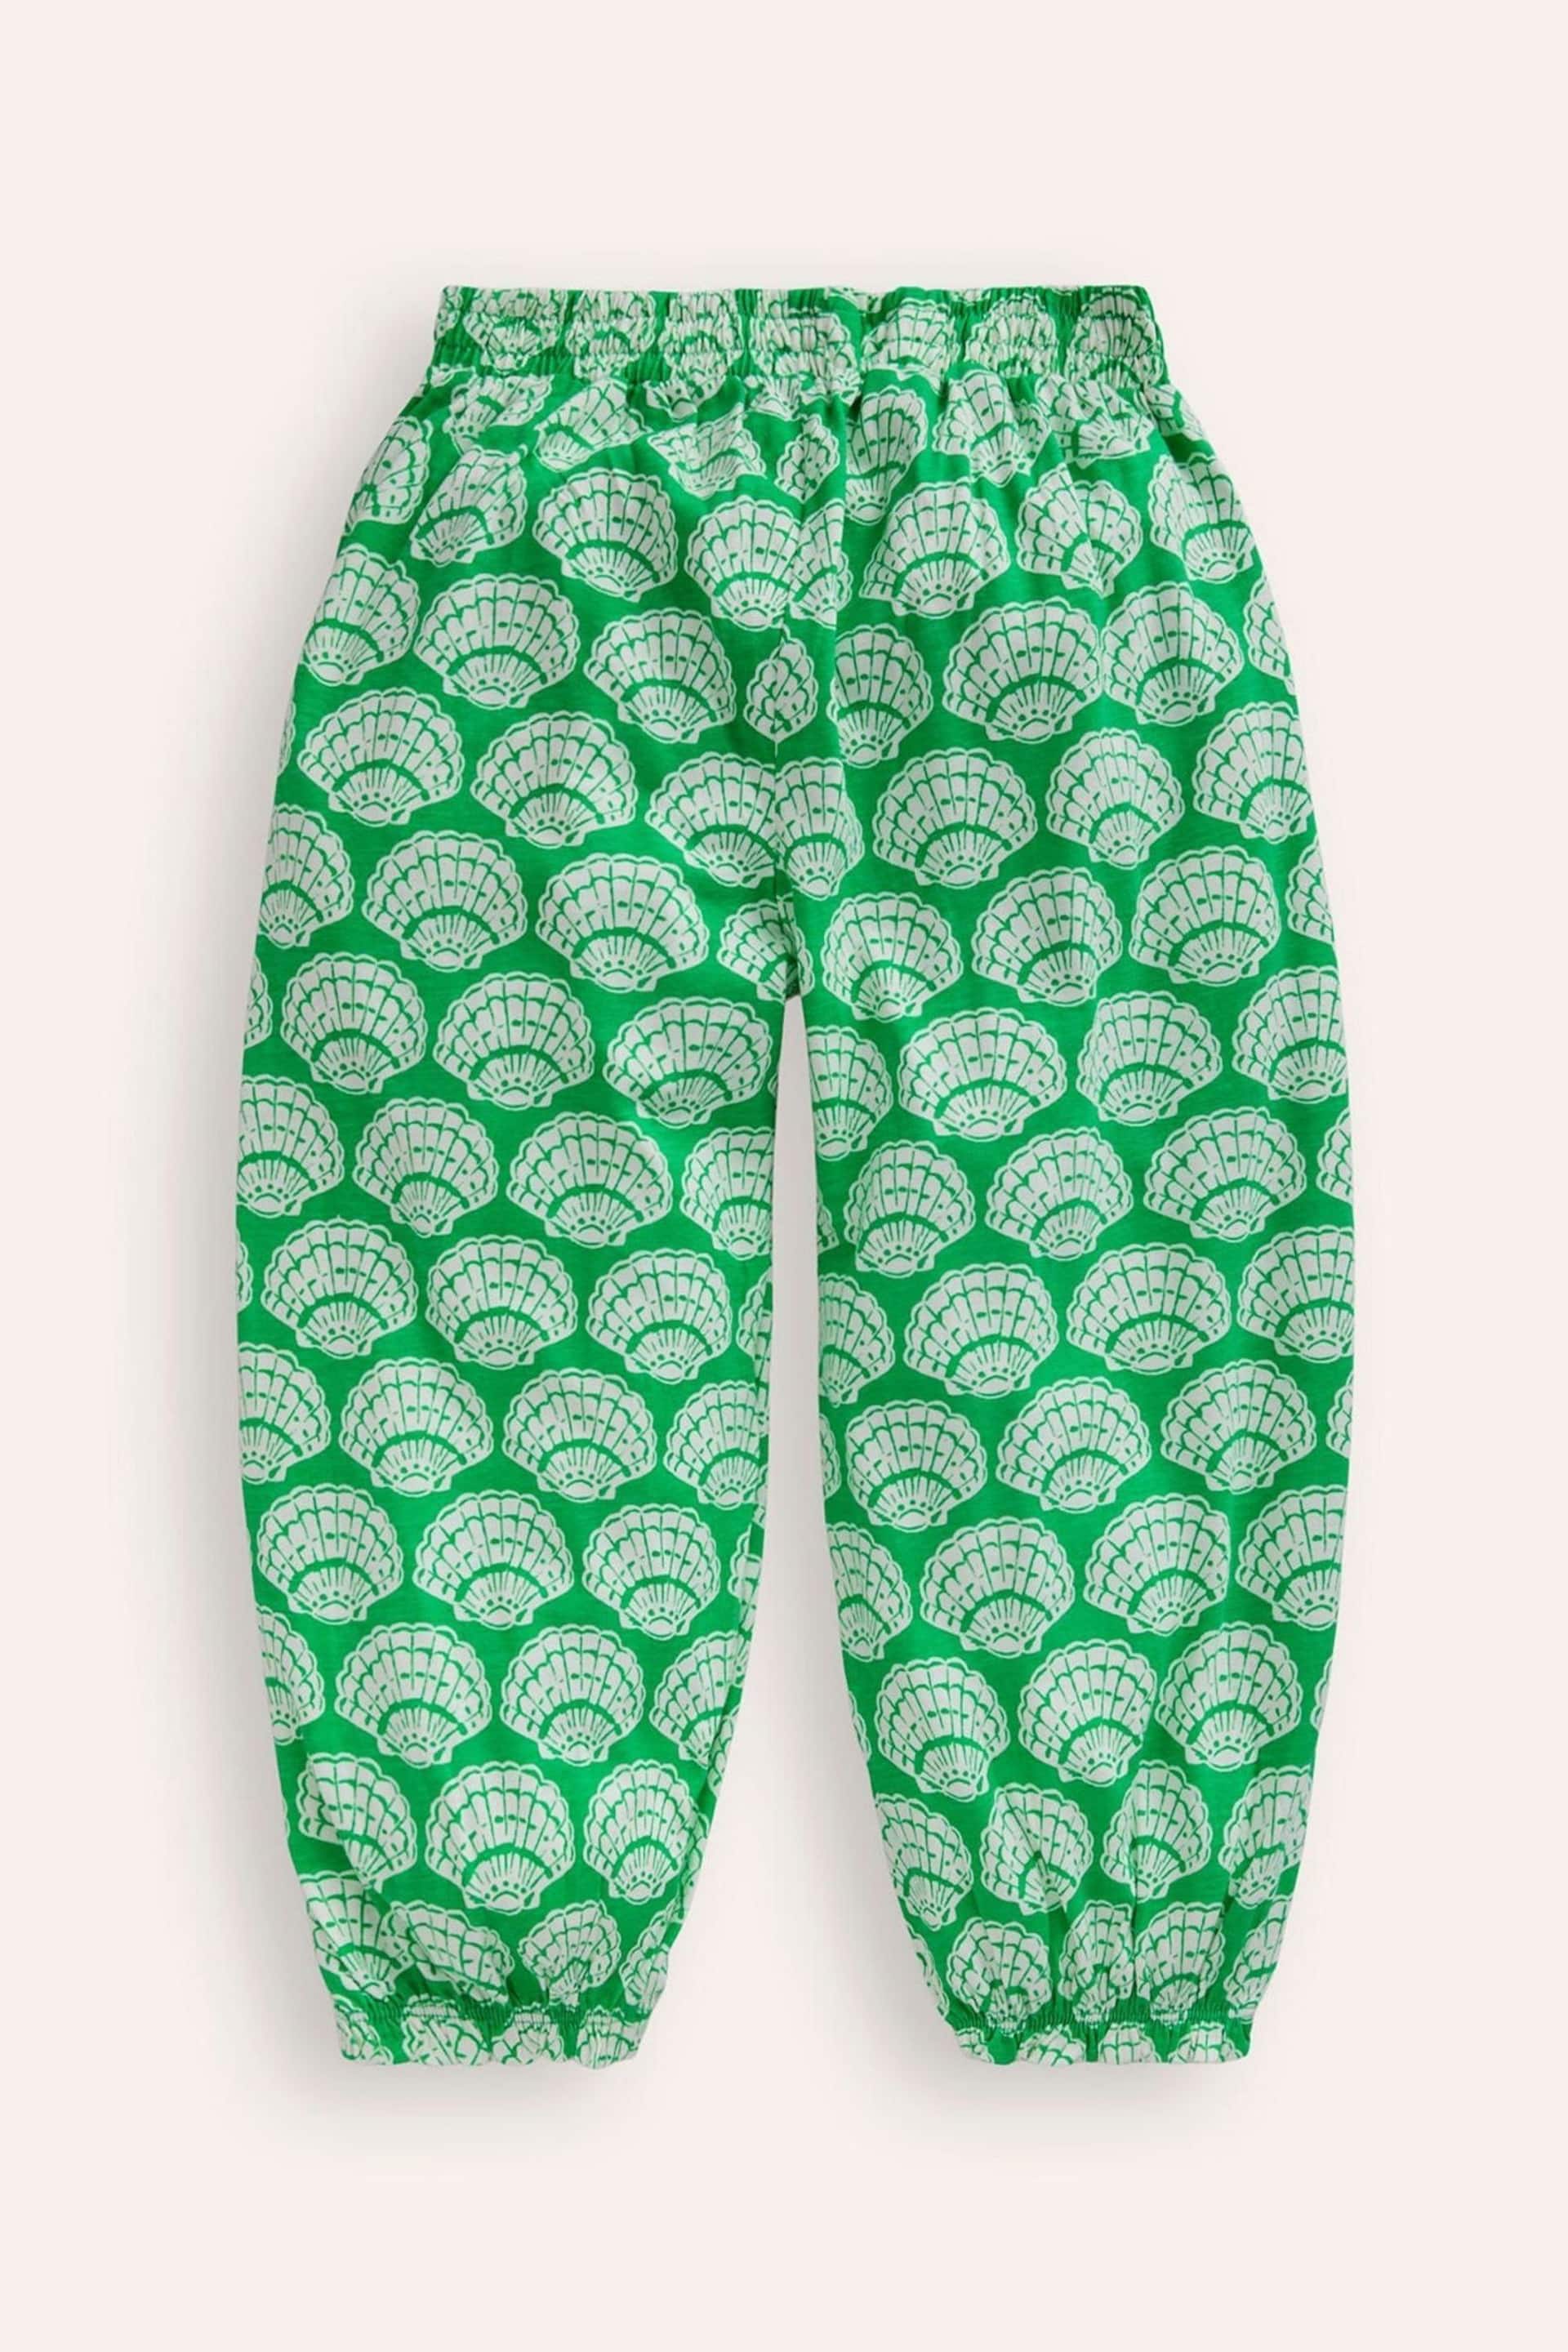 Boden Green Jersey Harem Trousers - Image 2 of 3